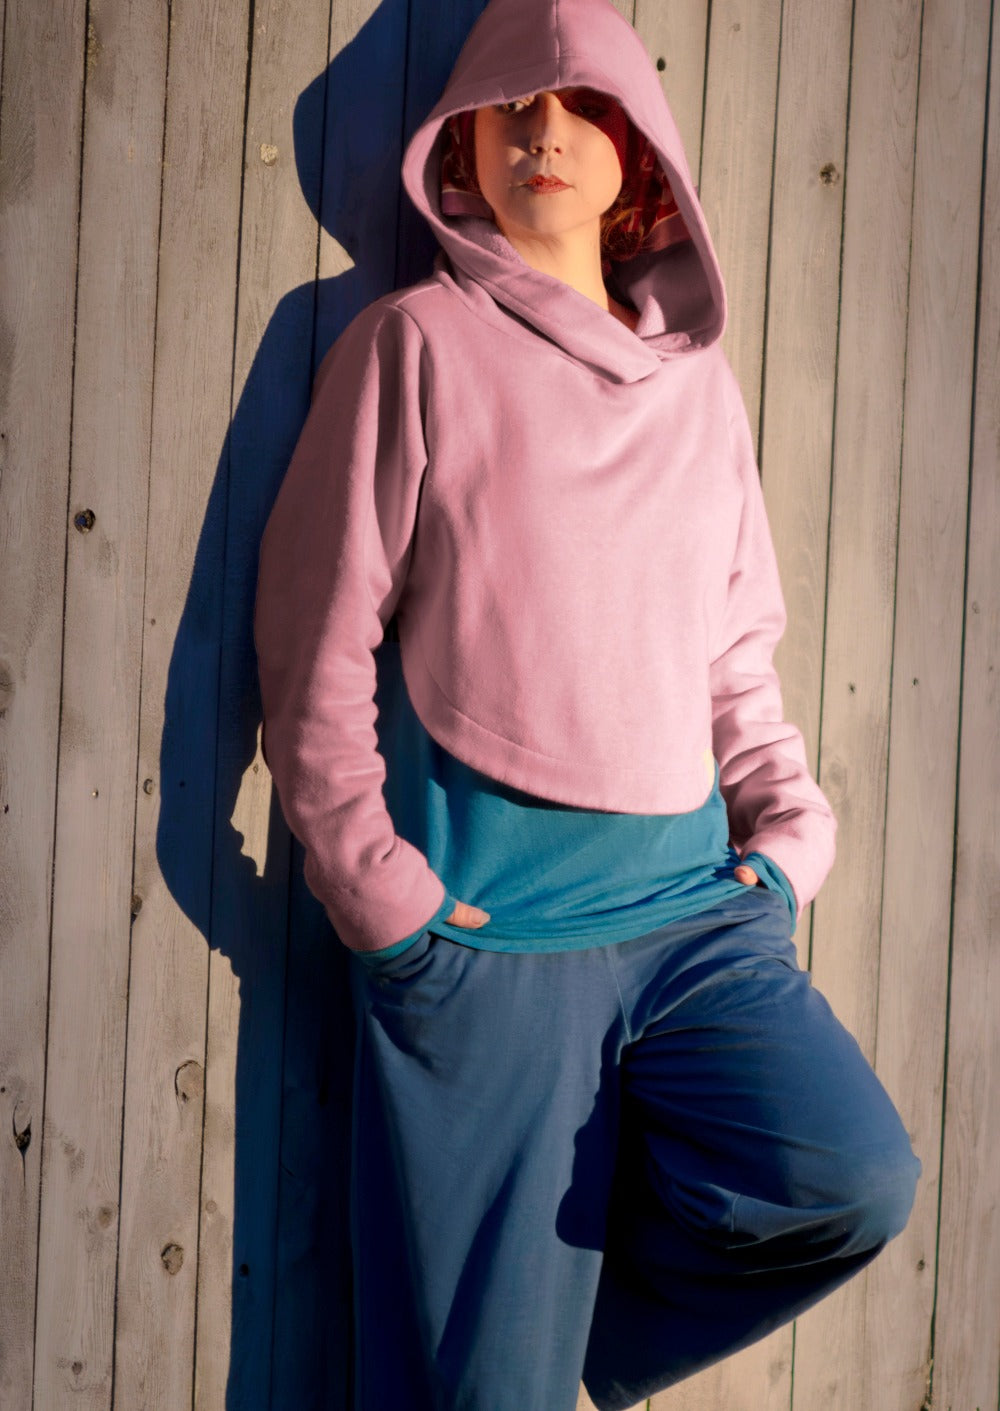 woman is pink hoodie and a pink headscarf for chemo head covering adaptive wear 